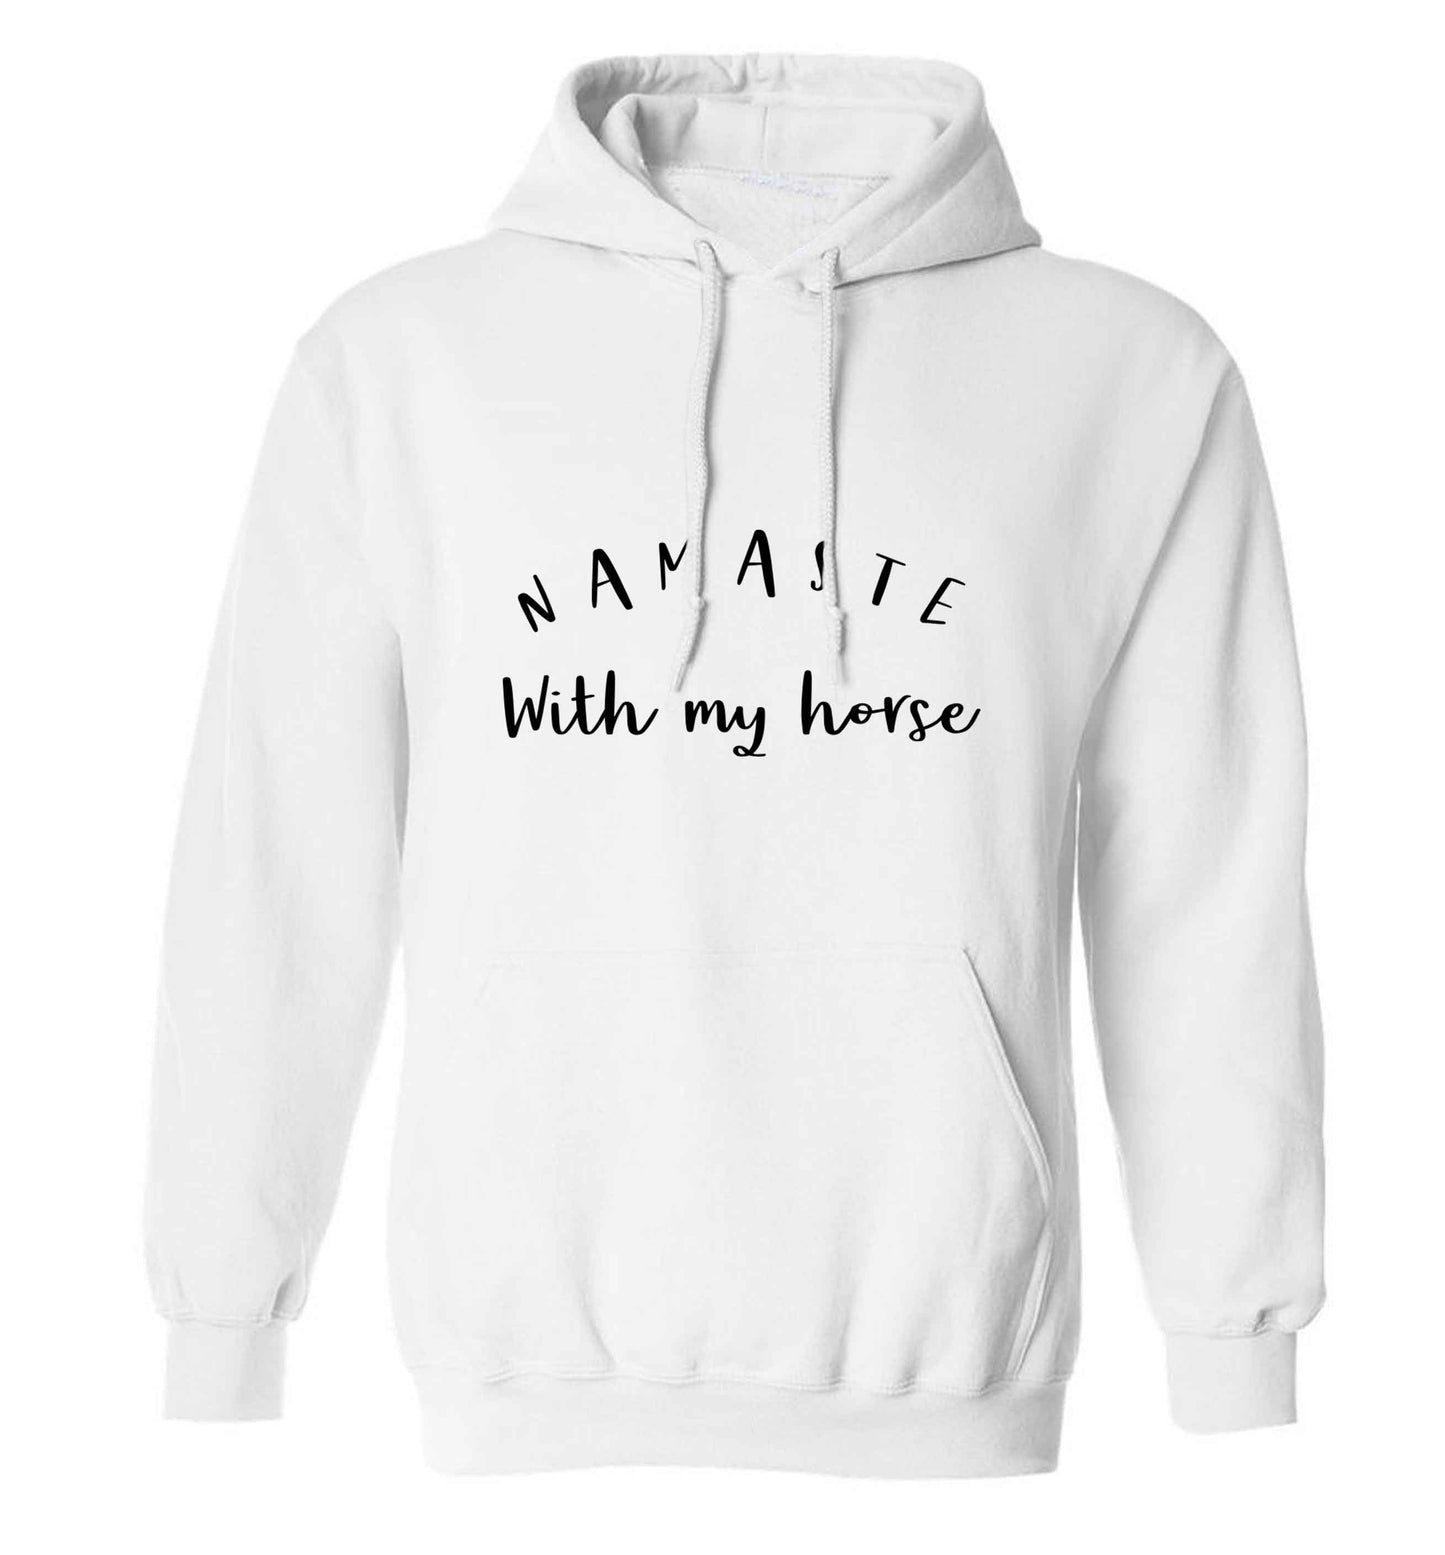 Namaste with my horse adults unisex white hoodie 2XL